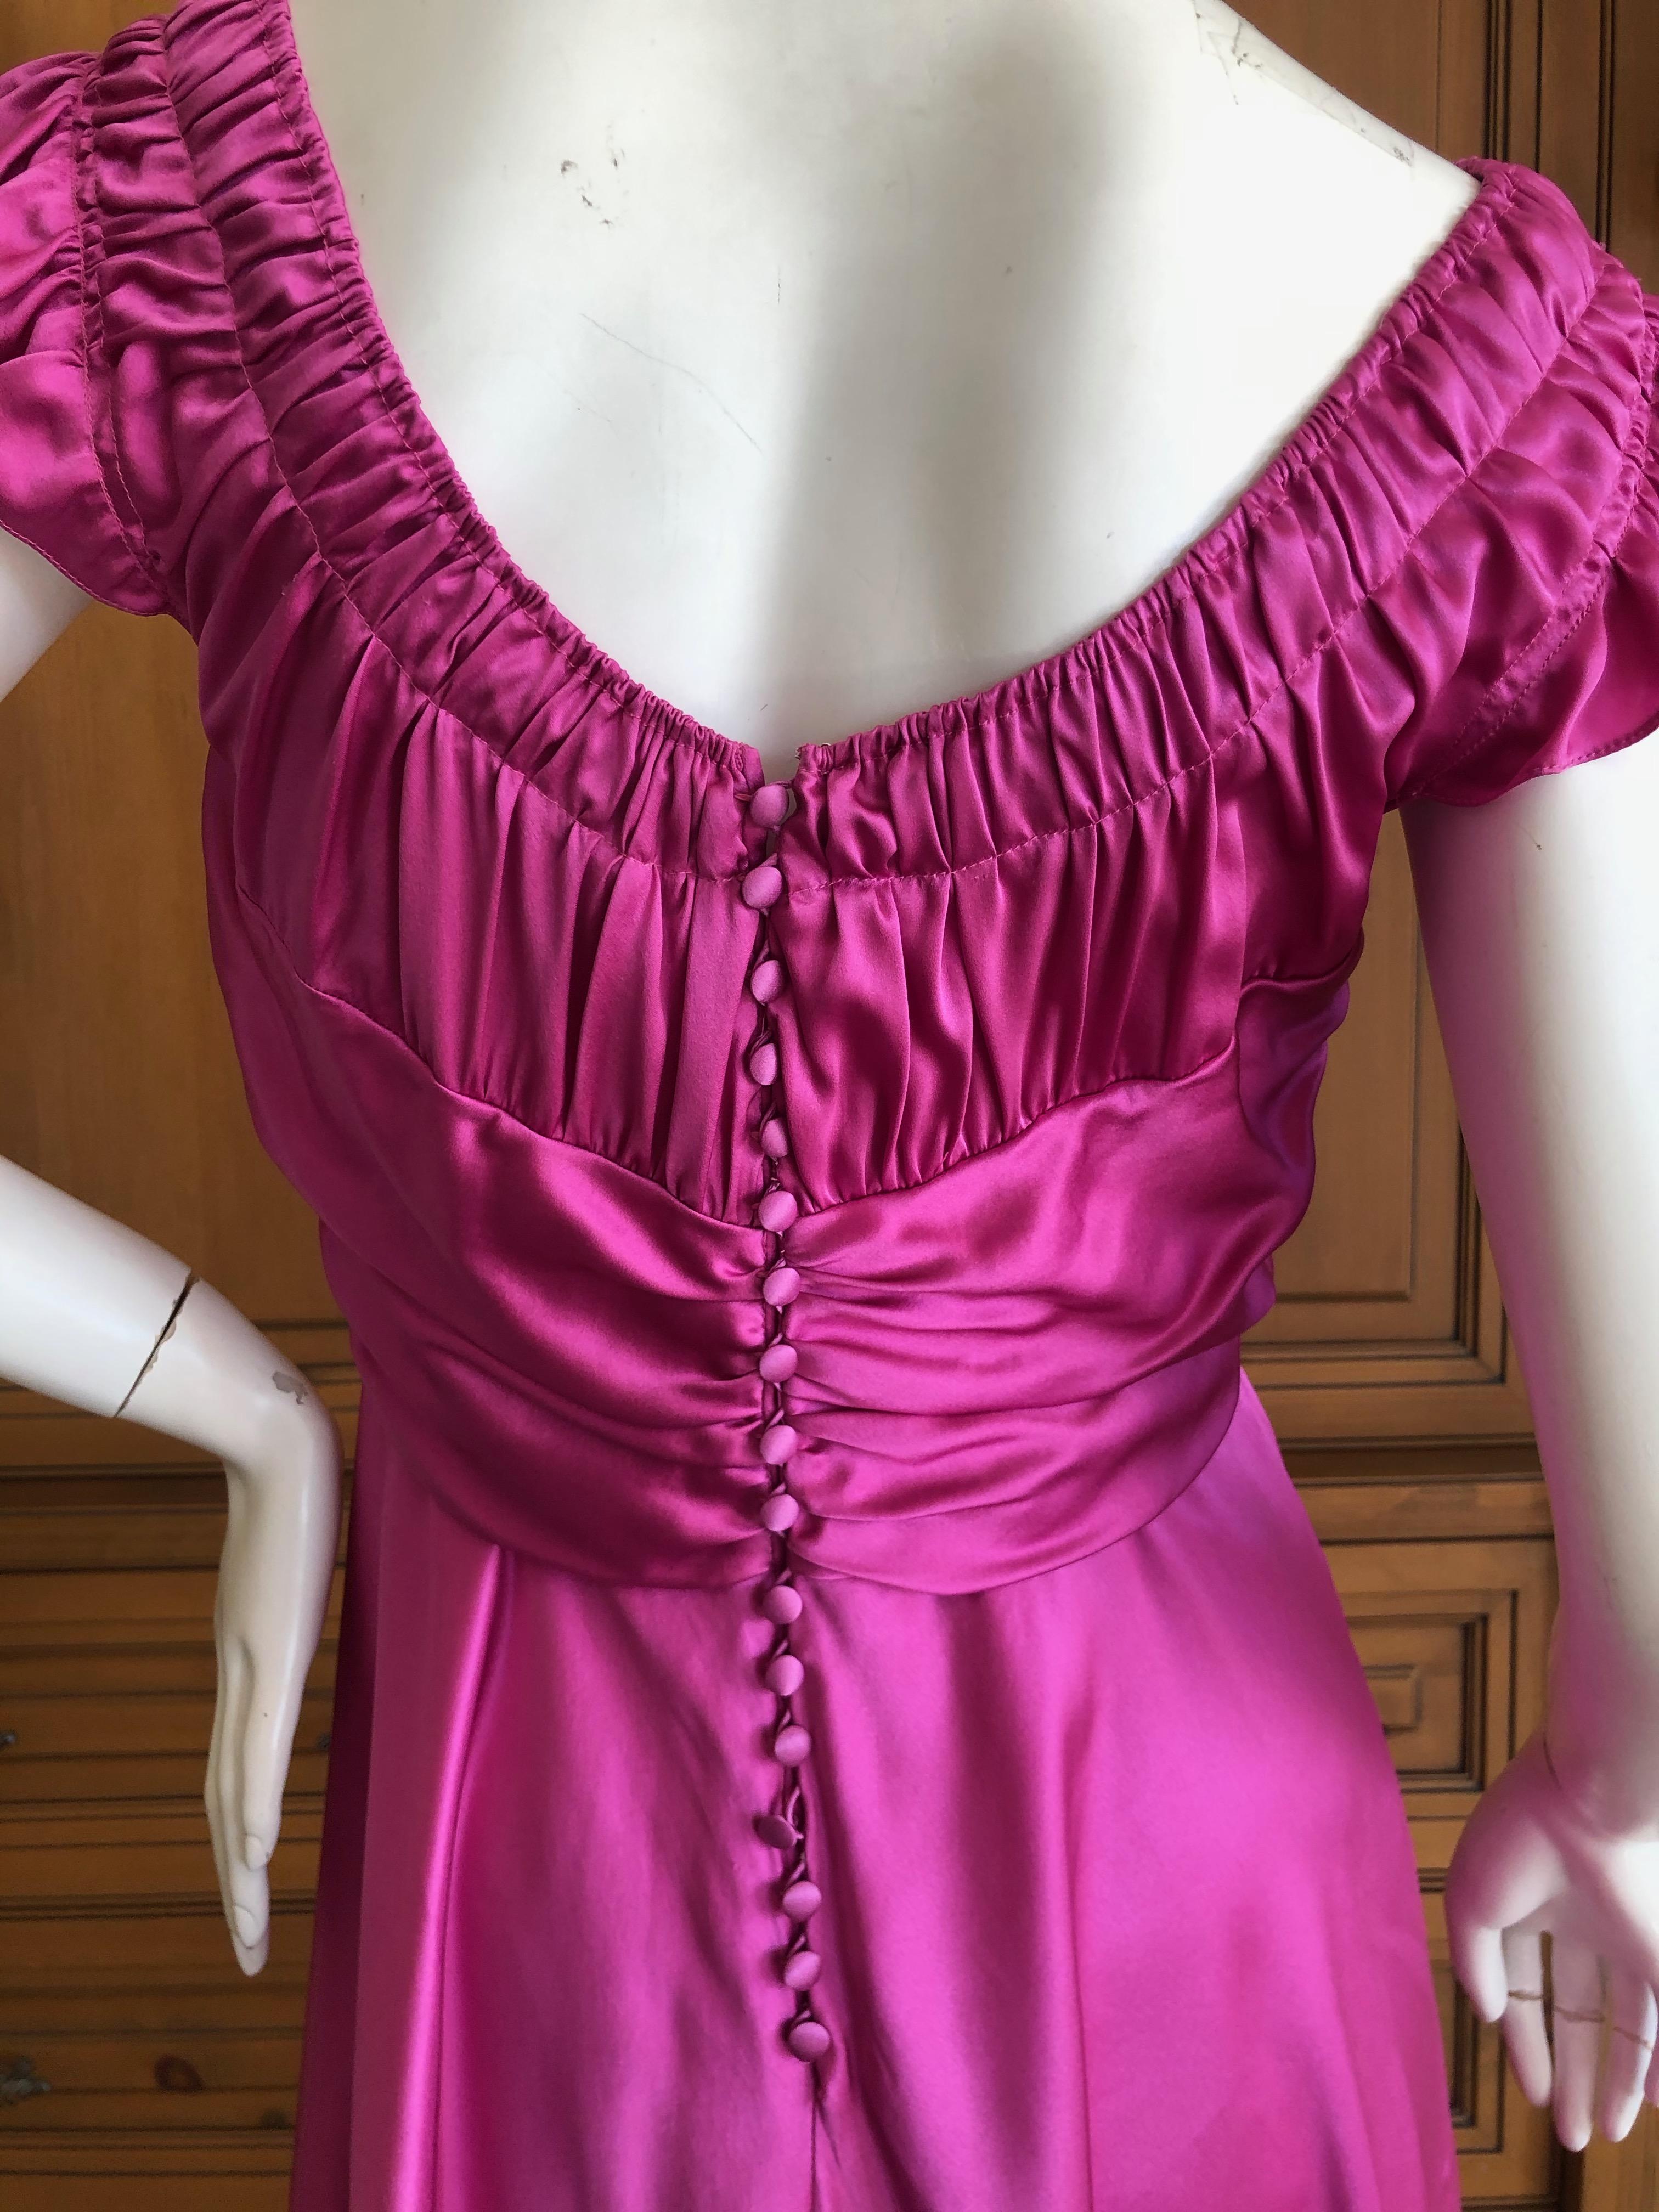   John Galliano Vintage Pink Low Cut Dress with Gathered Details For Sale 1